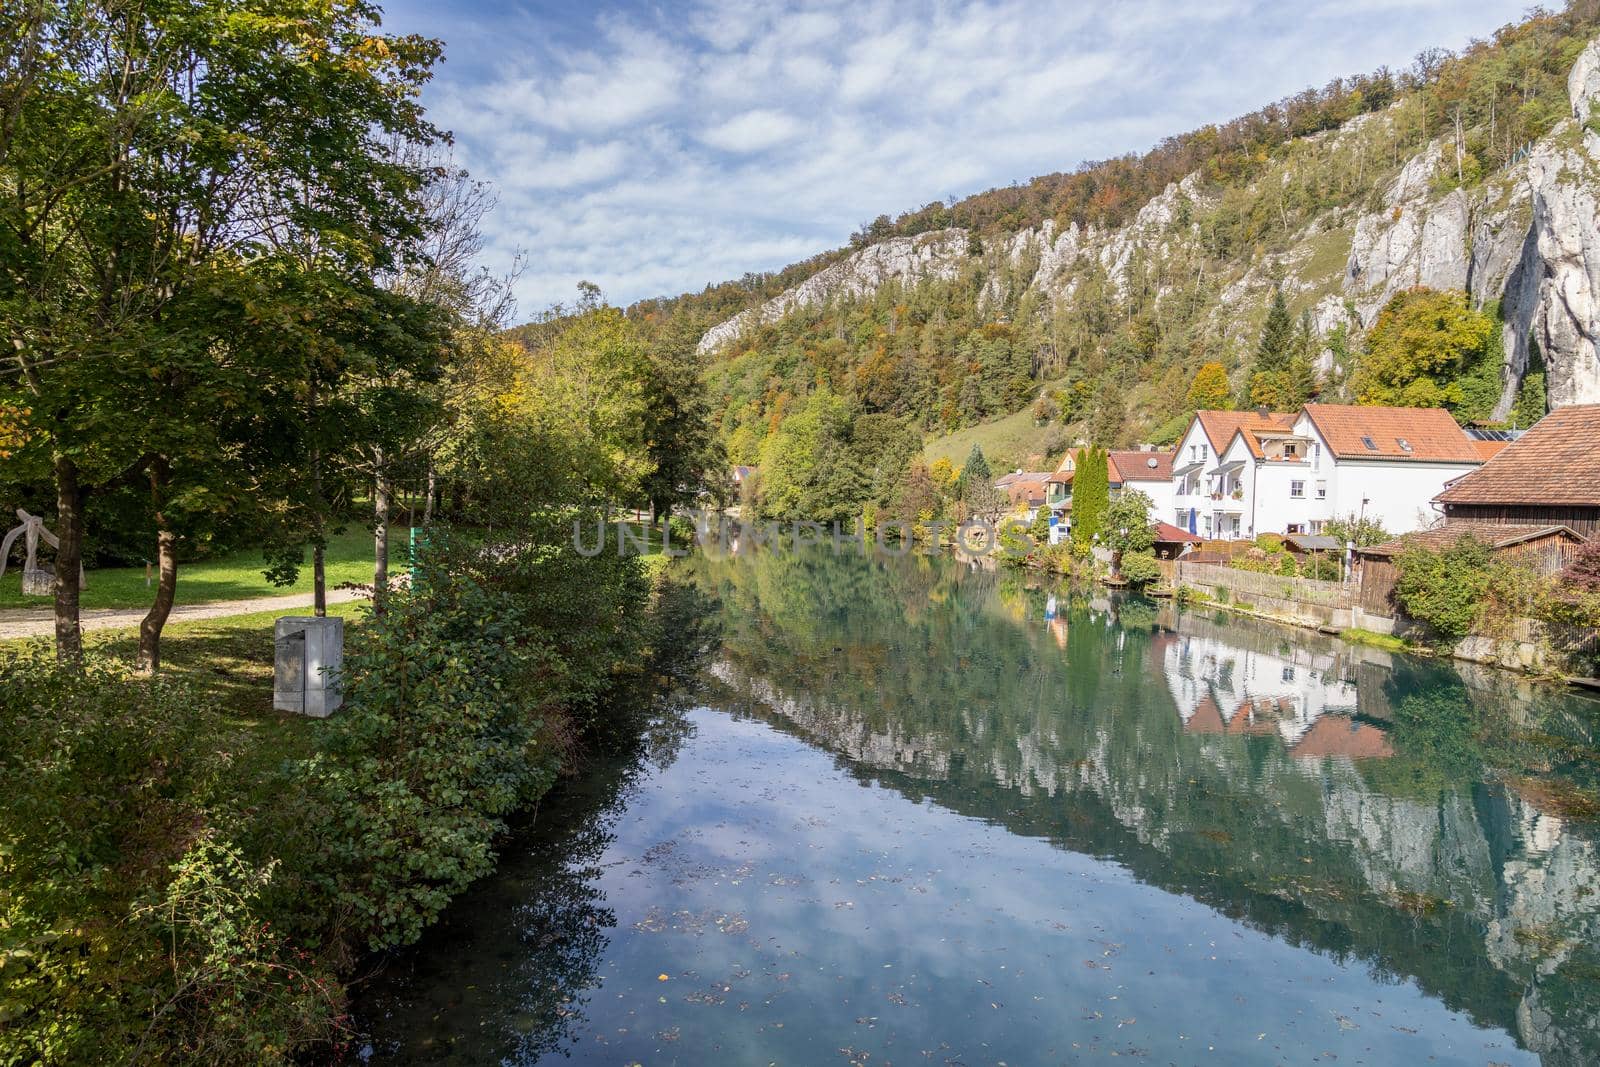 Idyllic view at the village Markt Essing in Bavaria, Germany with the Altmuehl river and high rocks on a sunny day in autumn